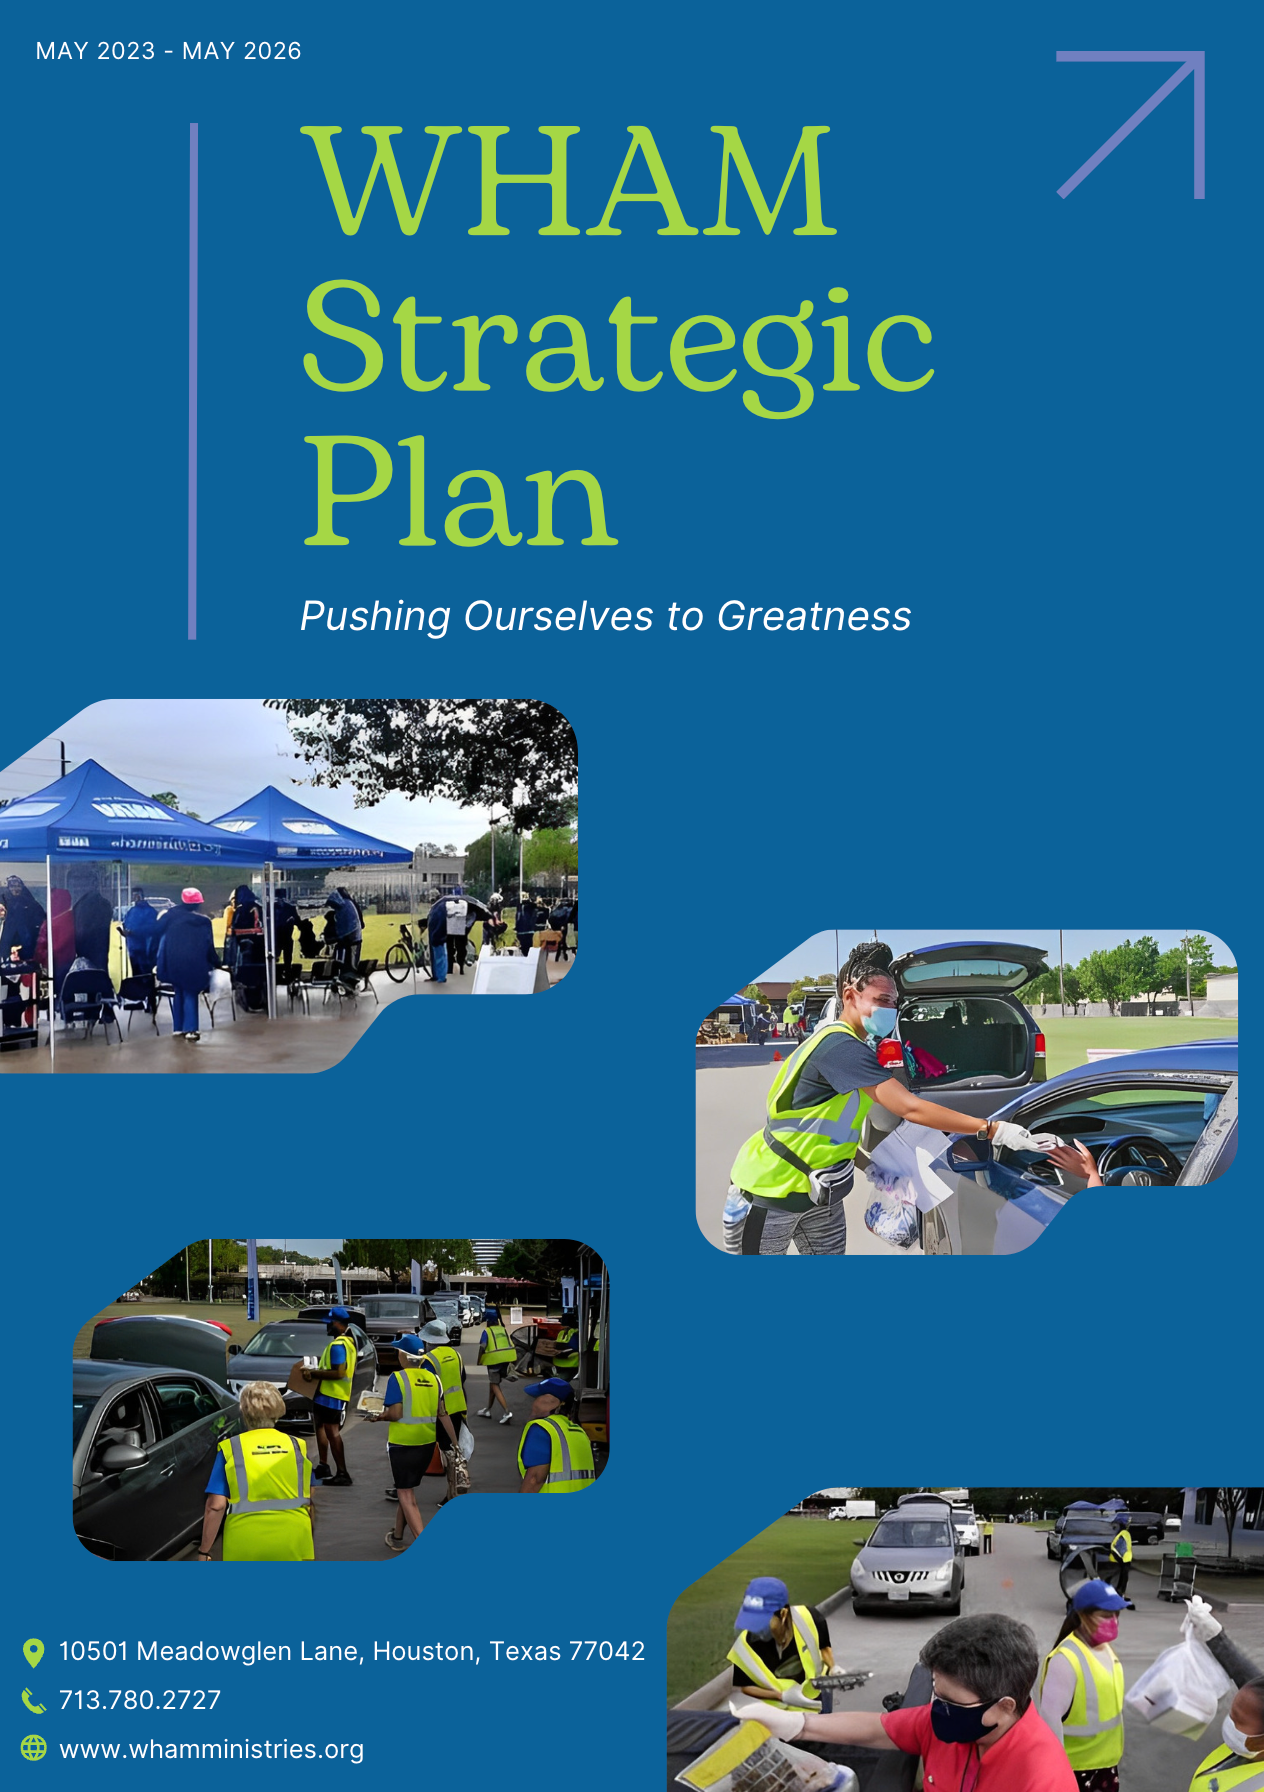 A promotional flyer for WHAM's Strategic Plan from May 2023 to May 2026. The top half of the flyer features the text 'WHAM Strategic Plan' in large yellow letters against a navy blue background, with a subtitle 'Pushing Ourselves to Greatness'. Below the text is a collage of images showing community outreach activities: volunteers in bright yellow vests handing out supplies to people in cars, setting up outdoor event areas, and working at what appears to be a food distribution drive. The contact information at the bottom in white text includes an address '10501 Meadowglen Lane, Houston, Texas 77042', a phone number '713.780.2727', and a website 'www.whamministries.org'. The overall design uses a blue and yellow color scheme, conveying an energetic and positive atmosphere